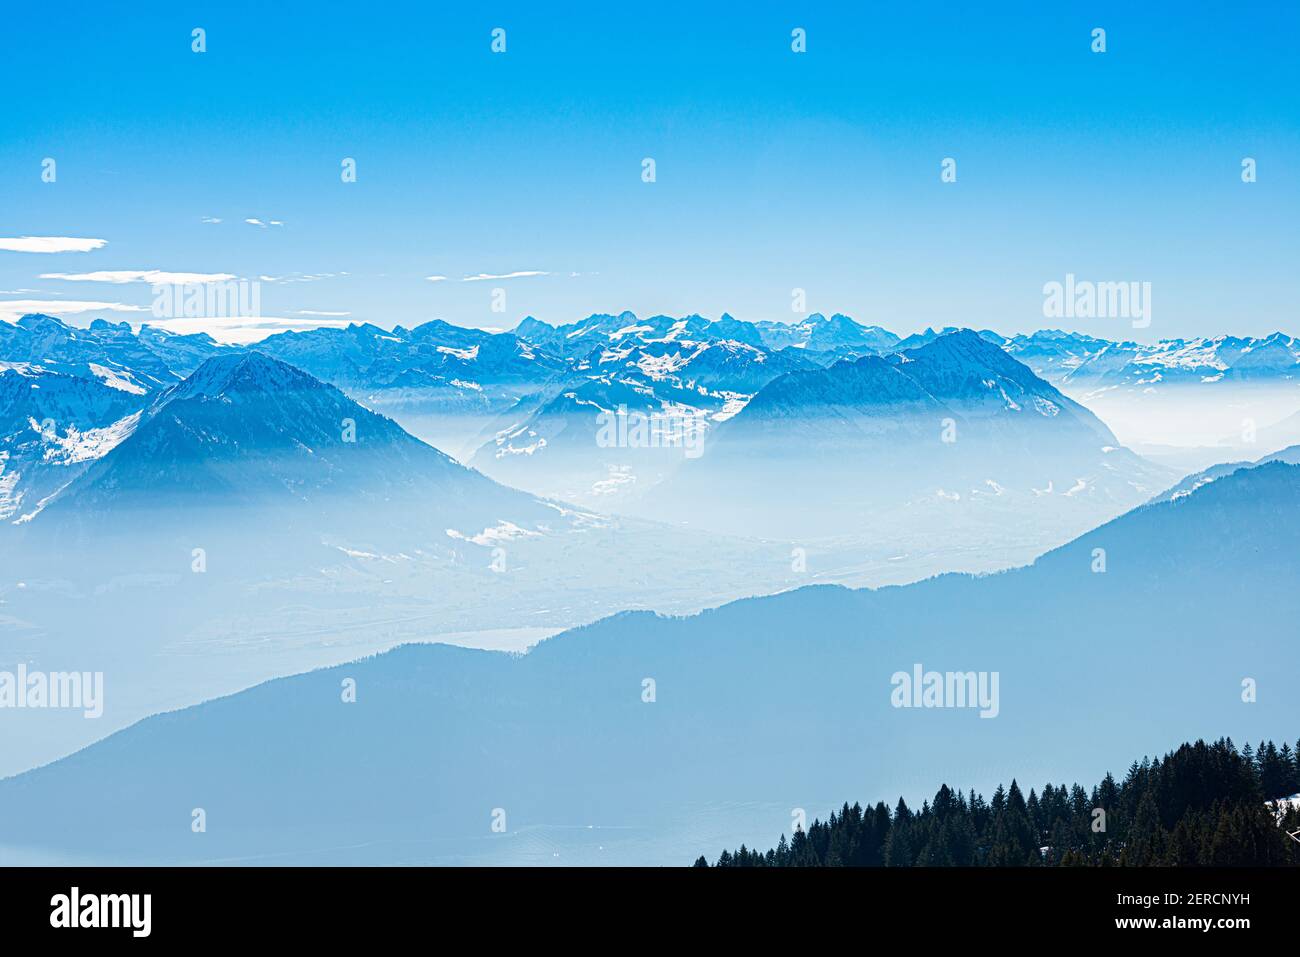 Unique panoramic alpine skyline aerial landscape view of misty iced Swiss Alps peaks in blue sky. Mount Rigi Switzerland in spring. Travel concept. Stock Photo